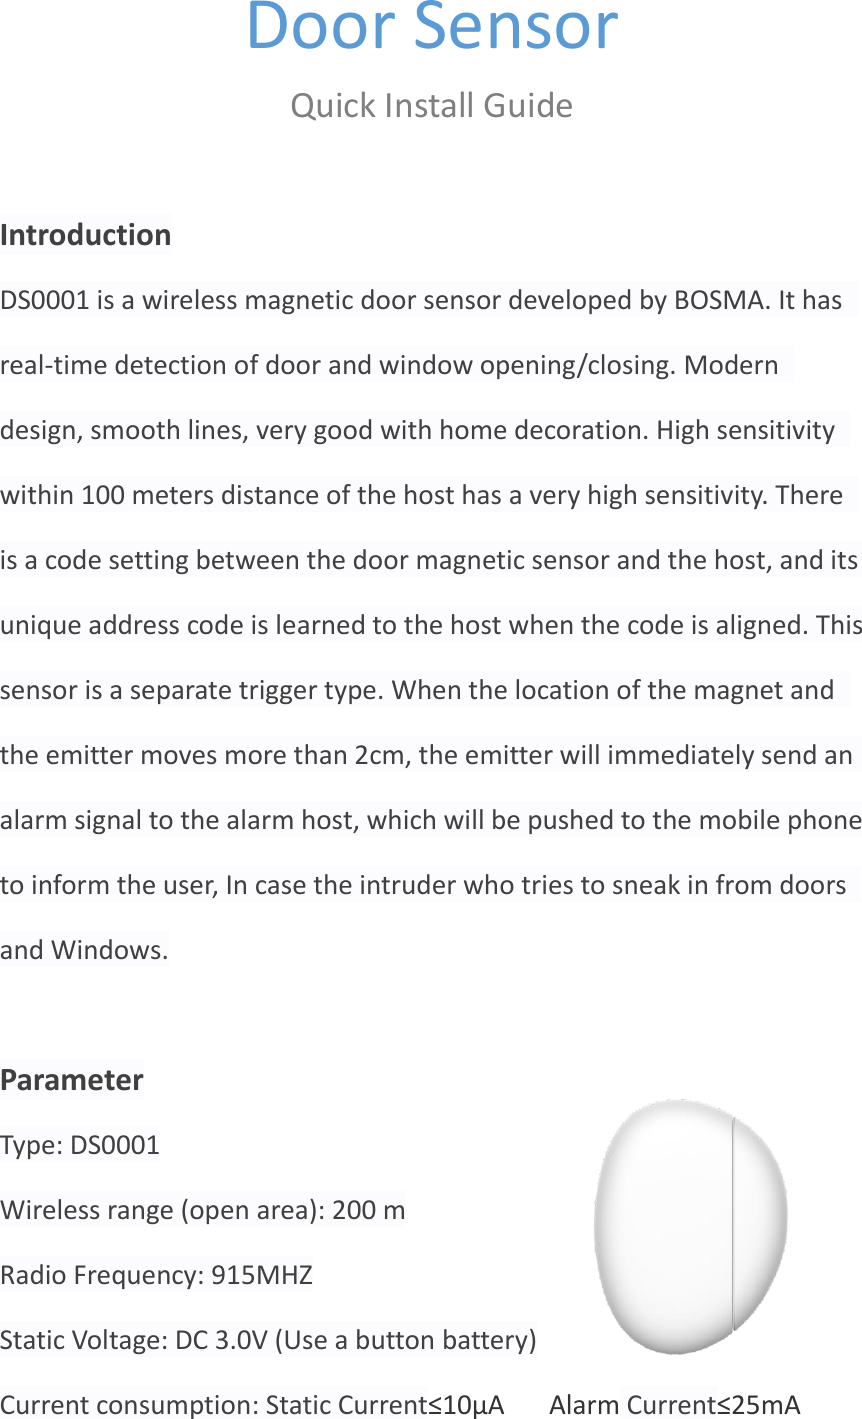 Door Sensor  Quick Install Guide  Introduction DS0001 is a wireless magnetic door sensor developed by BOSMA. It has real-time detection of door and window opening/closing. Modern design, smooth lines, very good with home decoration. High sensitivity within 100 meters distance of the host has a very high sensitivity. There is a code setting between the door magnetic sensor and the host, and its unique address code is learned to the host when the code is aligned. This sensor is a separate trigger type. When the location of the magnet and the emitter moves more than 2cm, the emitter will immediately send an alarm signal to the alarm host, which will be pushed to the mobile phone to inform the user, In case the intruder who tries to sneak in from doors and Windows.  Parameter Type: DS0001 Wireless range (open area): 200 m Radio Frequency: 915MHZ Static Voltage: DC 3.0V (Use a button battery) Current consumption: Static Current≤10μA    Alarm Current≤25mA 